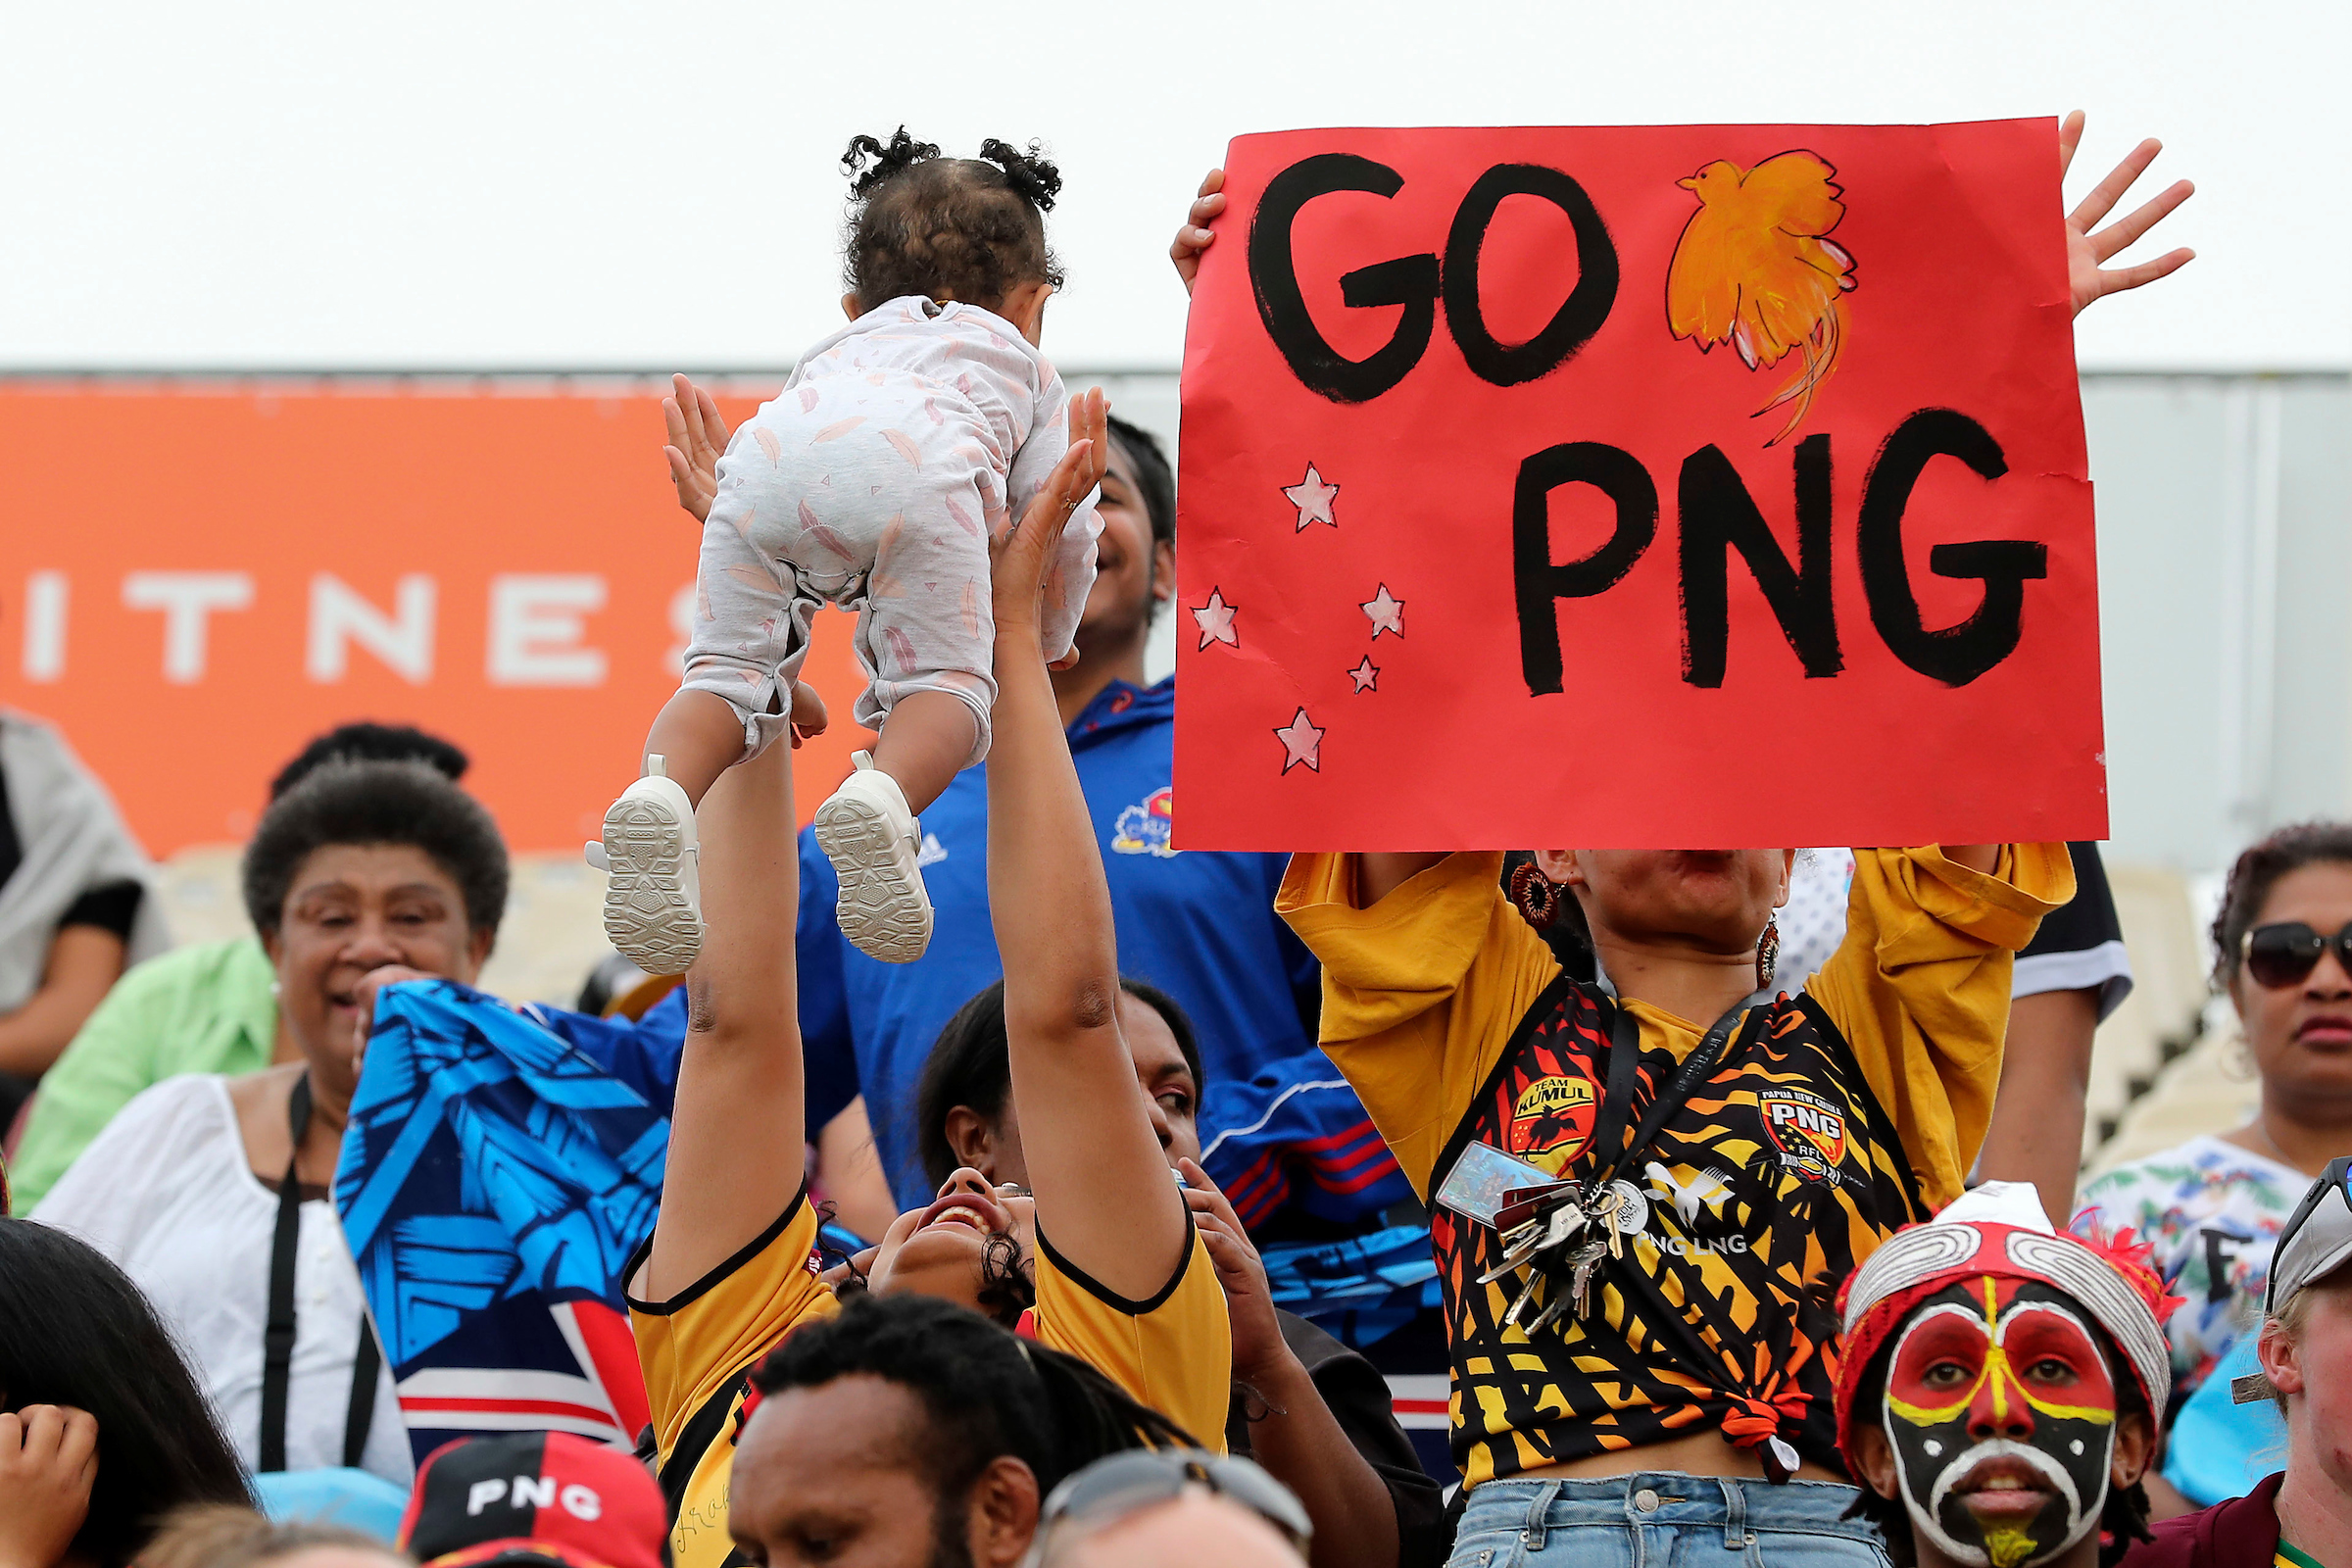 rlwc image of people celebrating with a lady throwing a baby in the air and a woman holding a sign saying GO PNG